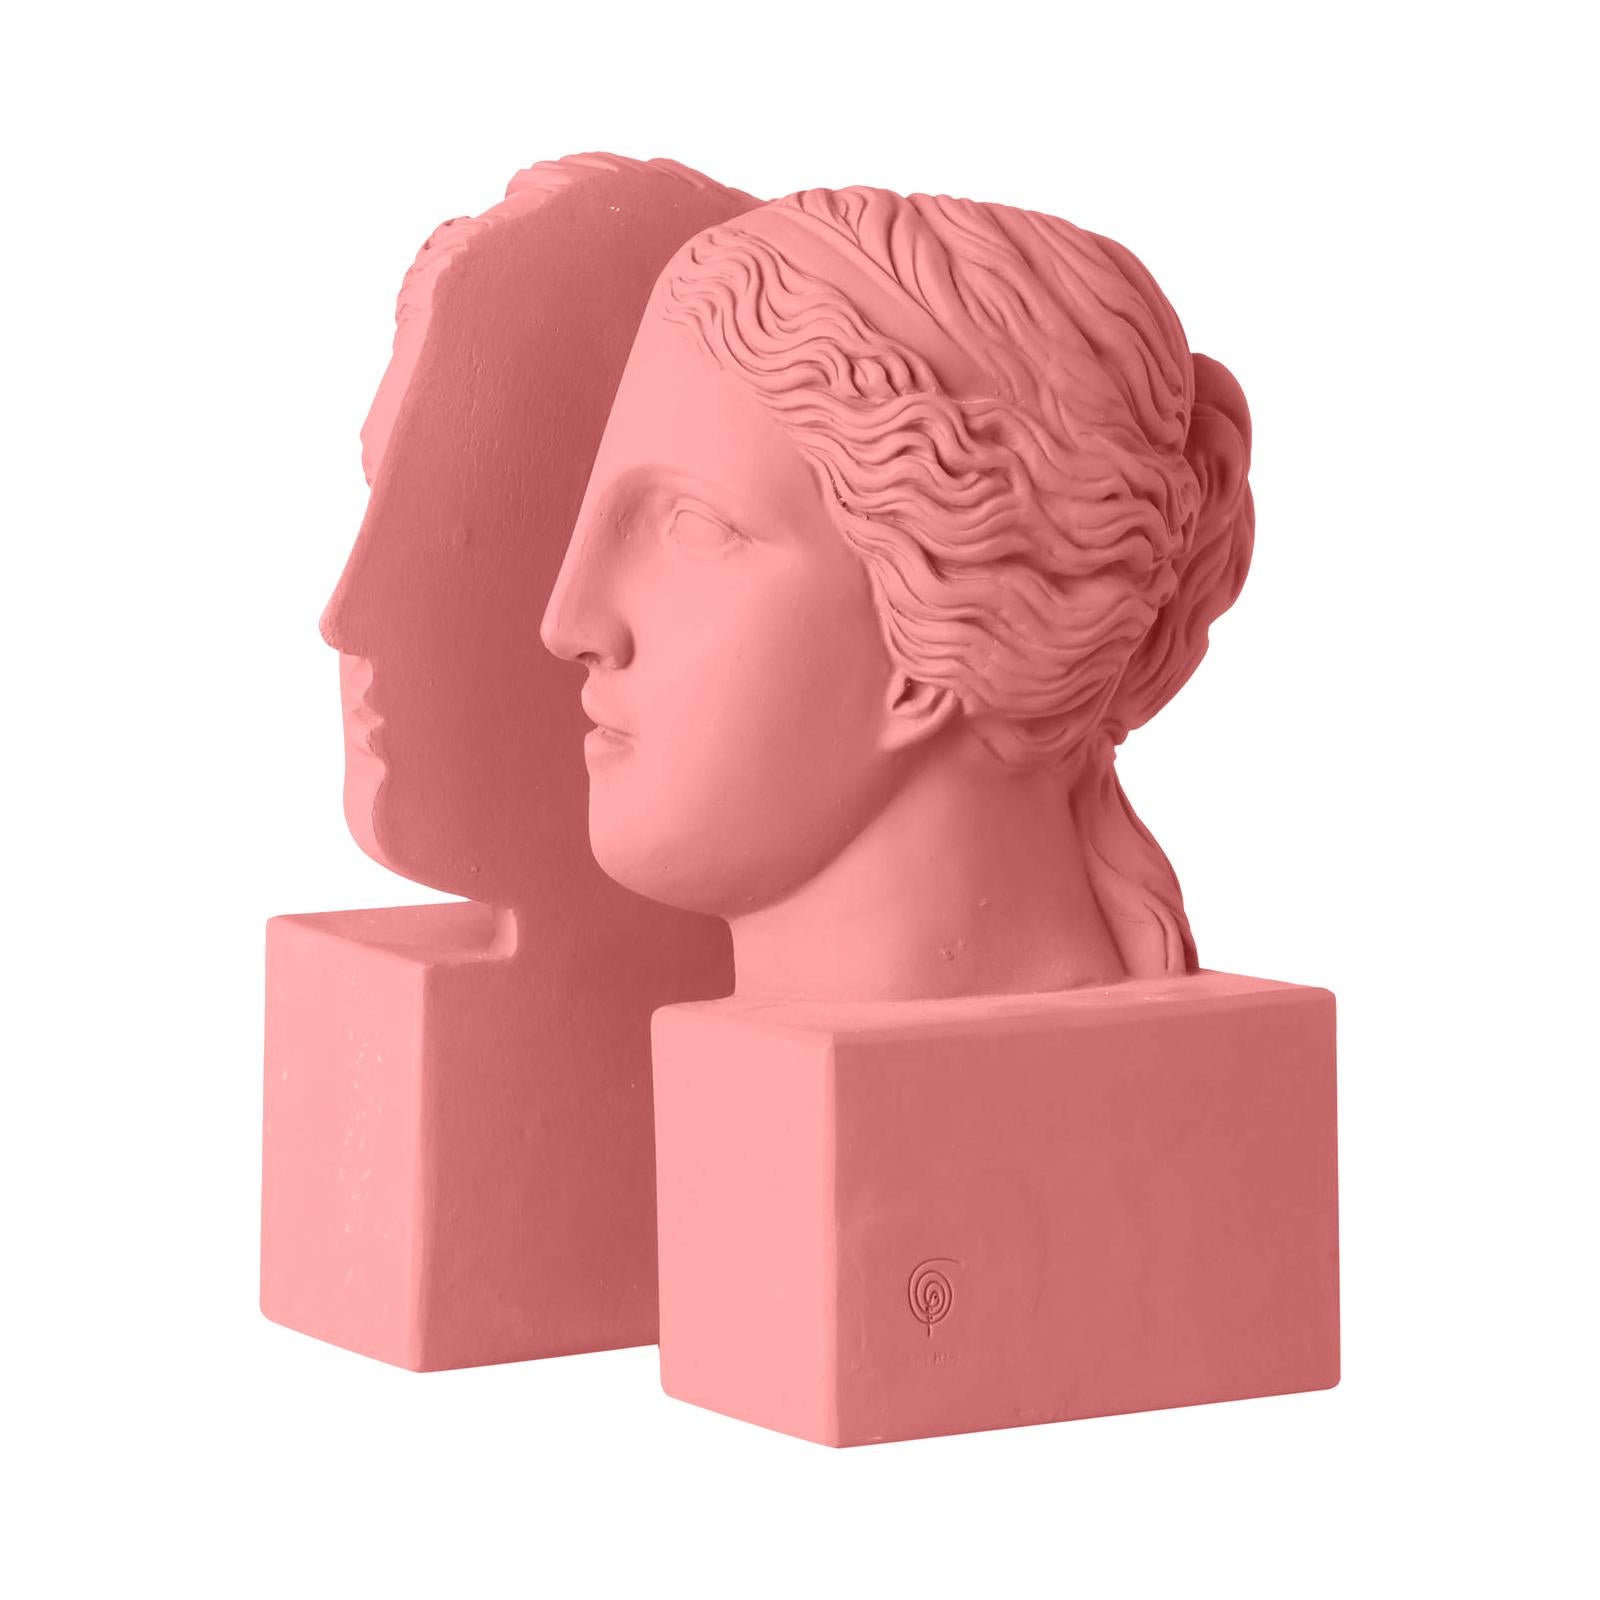 Venus Set of 2 Bookends in rose pink
Aphrodite, the Goddess of love and beauty. 

Made in Athens, Greece.

      